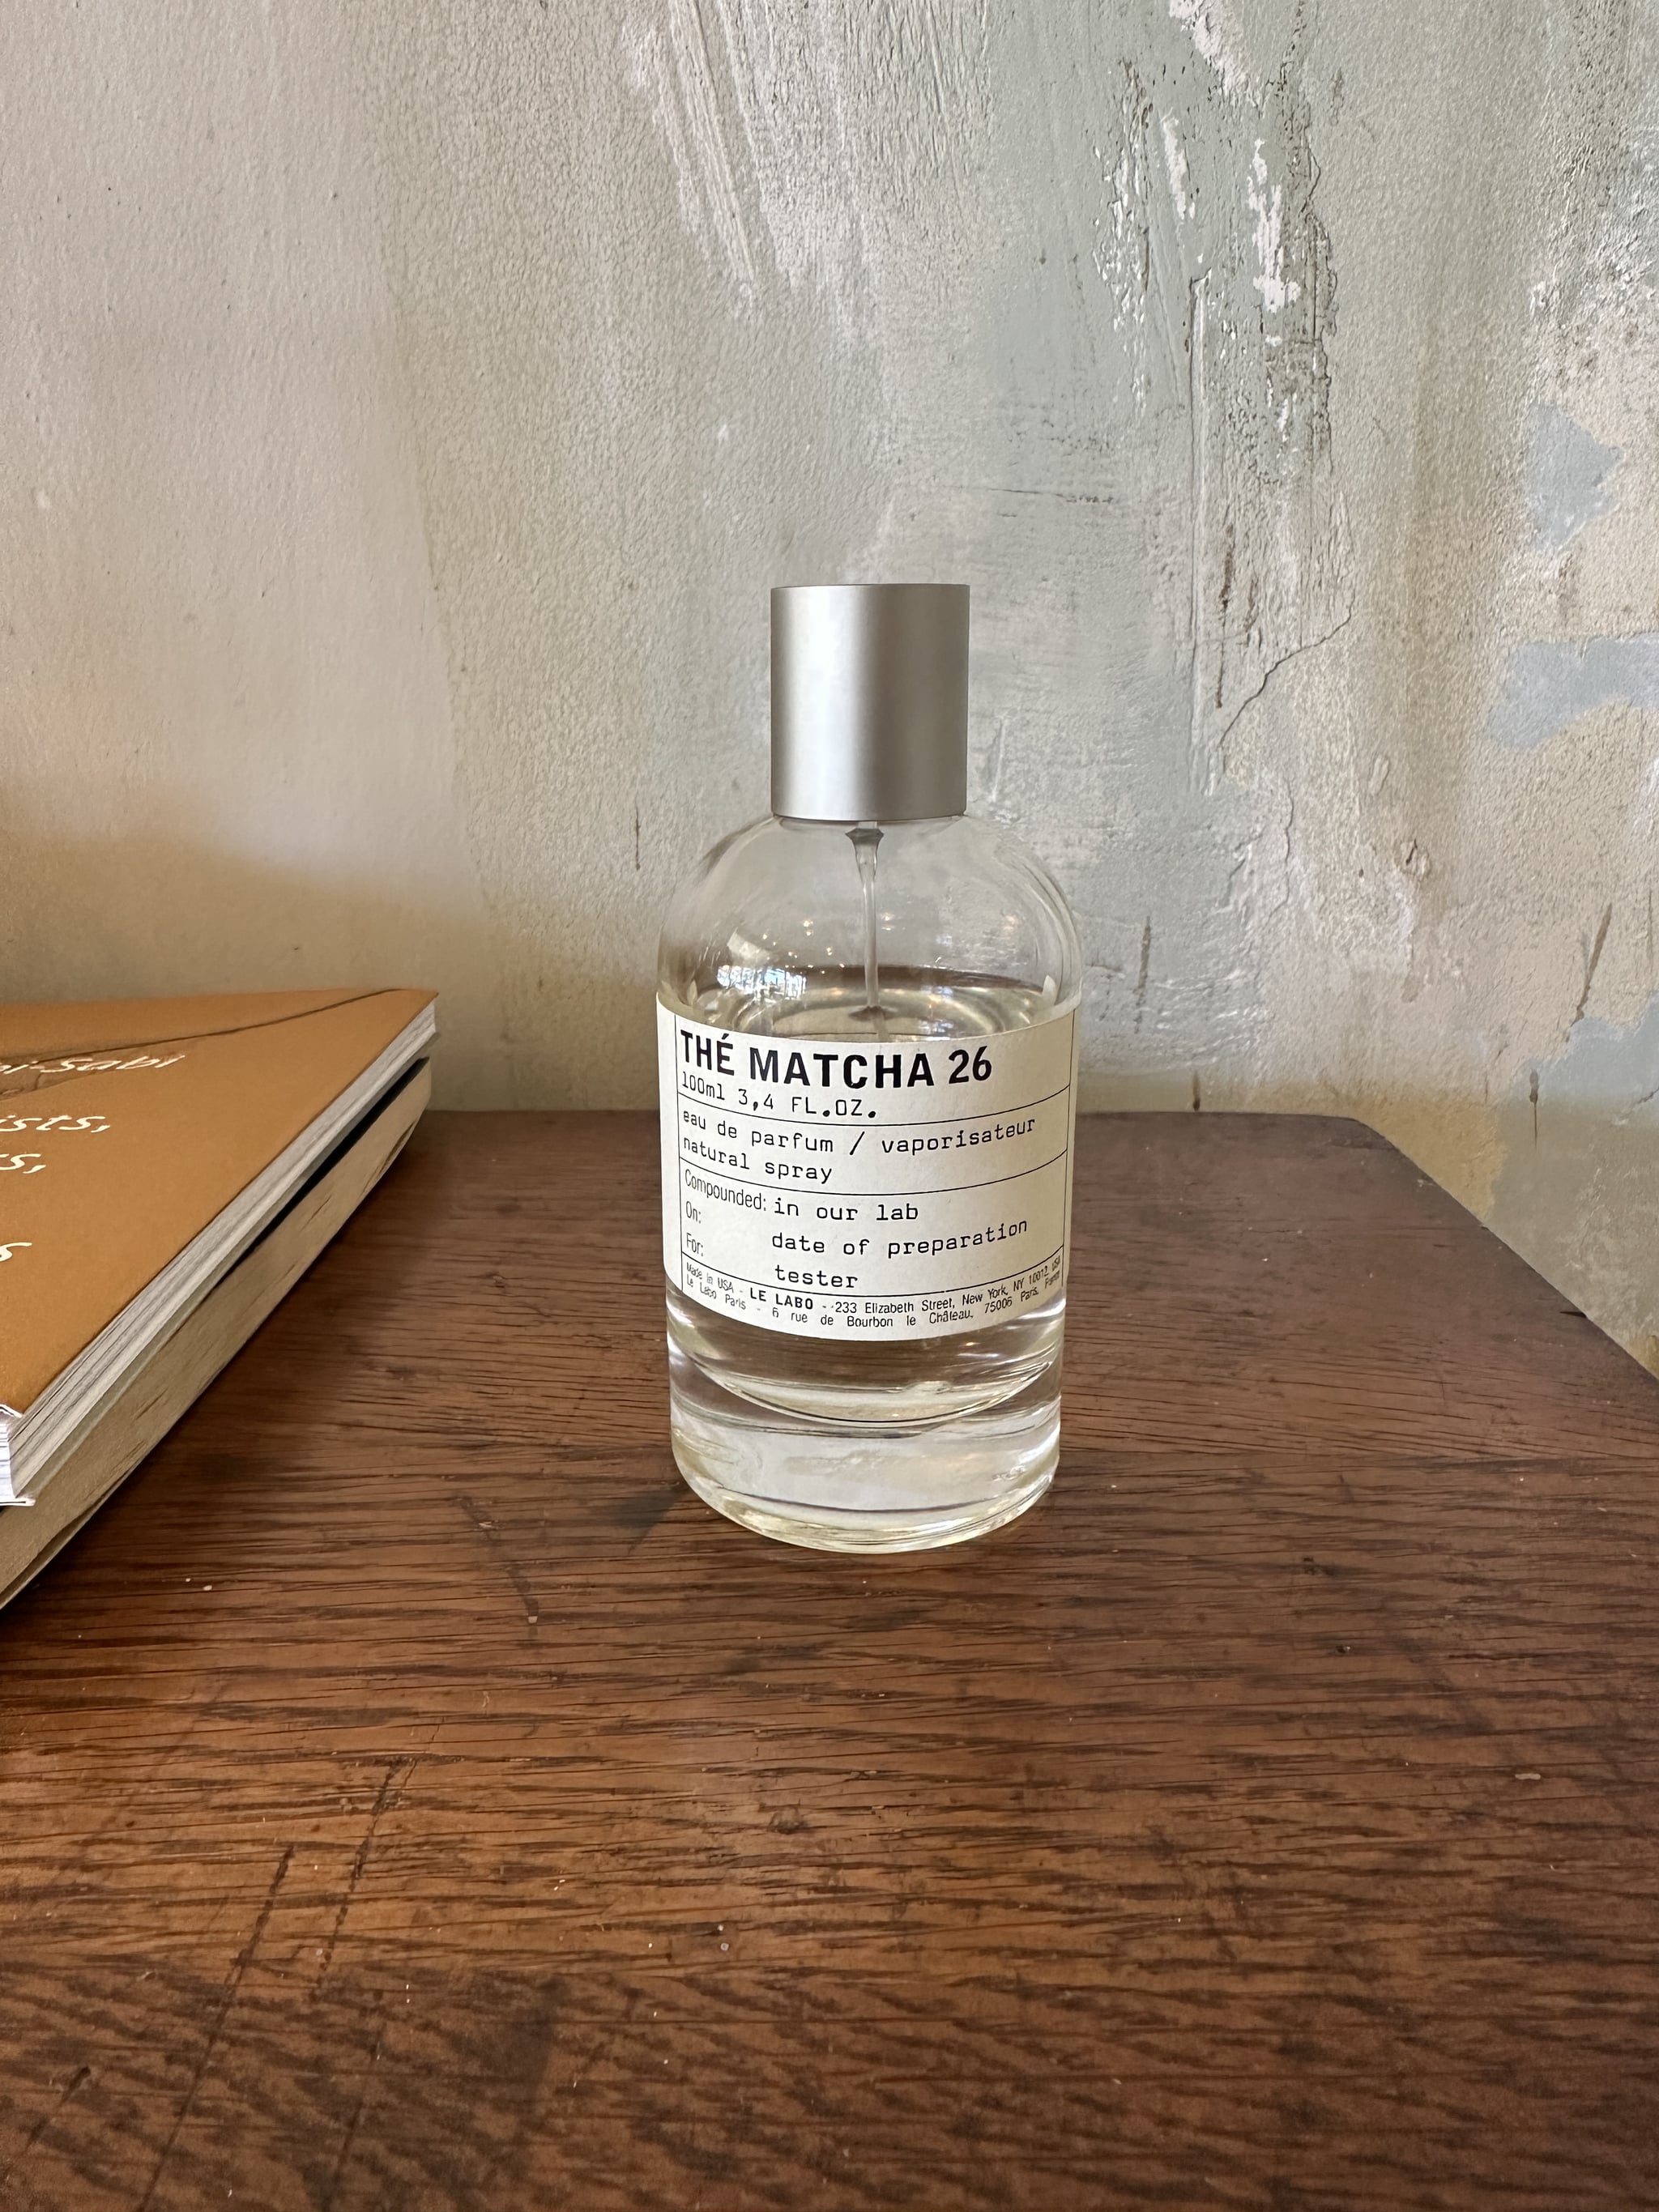 Le Labo Thé Matcha 26: For Making Your Ex Regret Their Choices